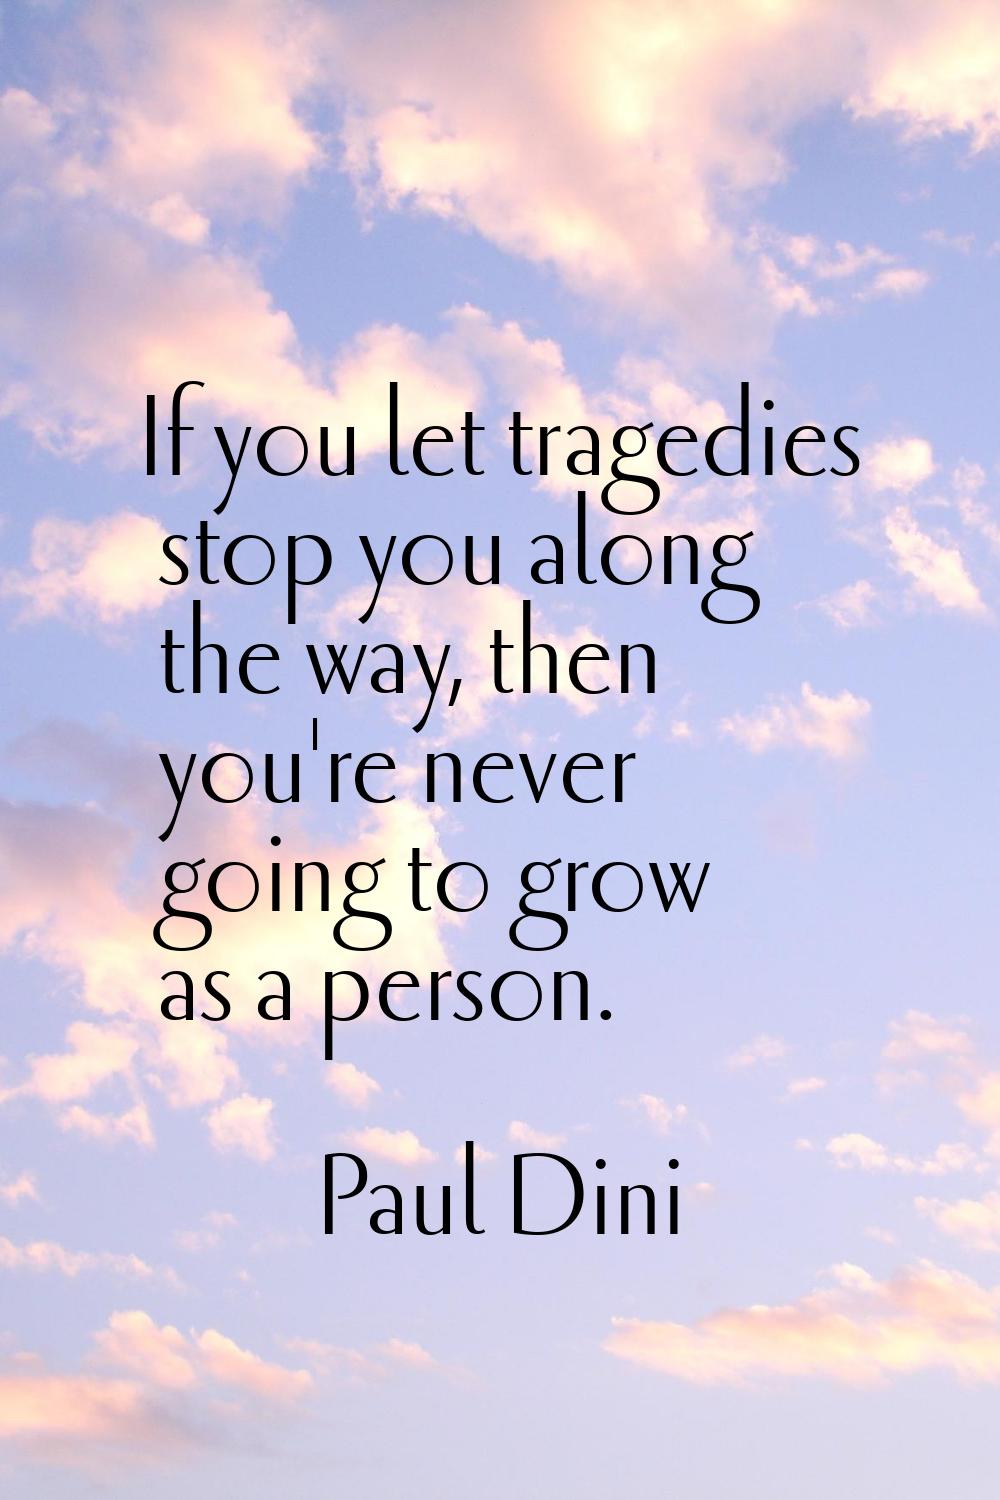 If you let tragedies stop you along the way, then you're never going to grow as a person.